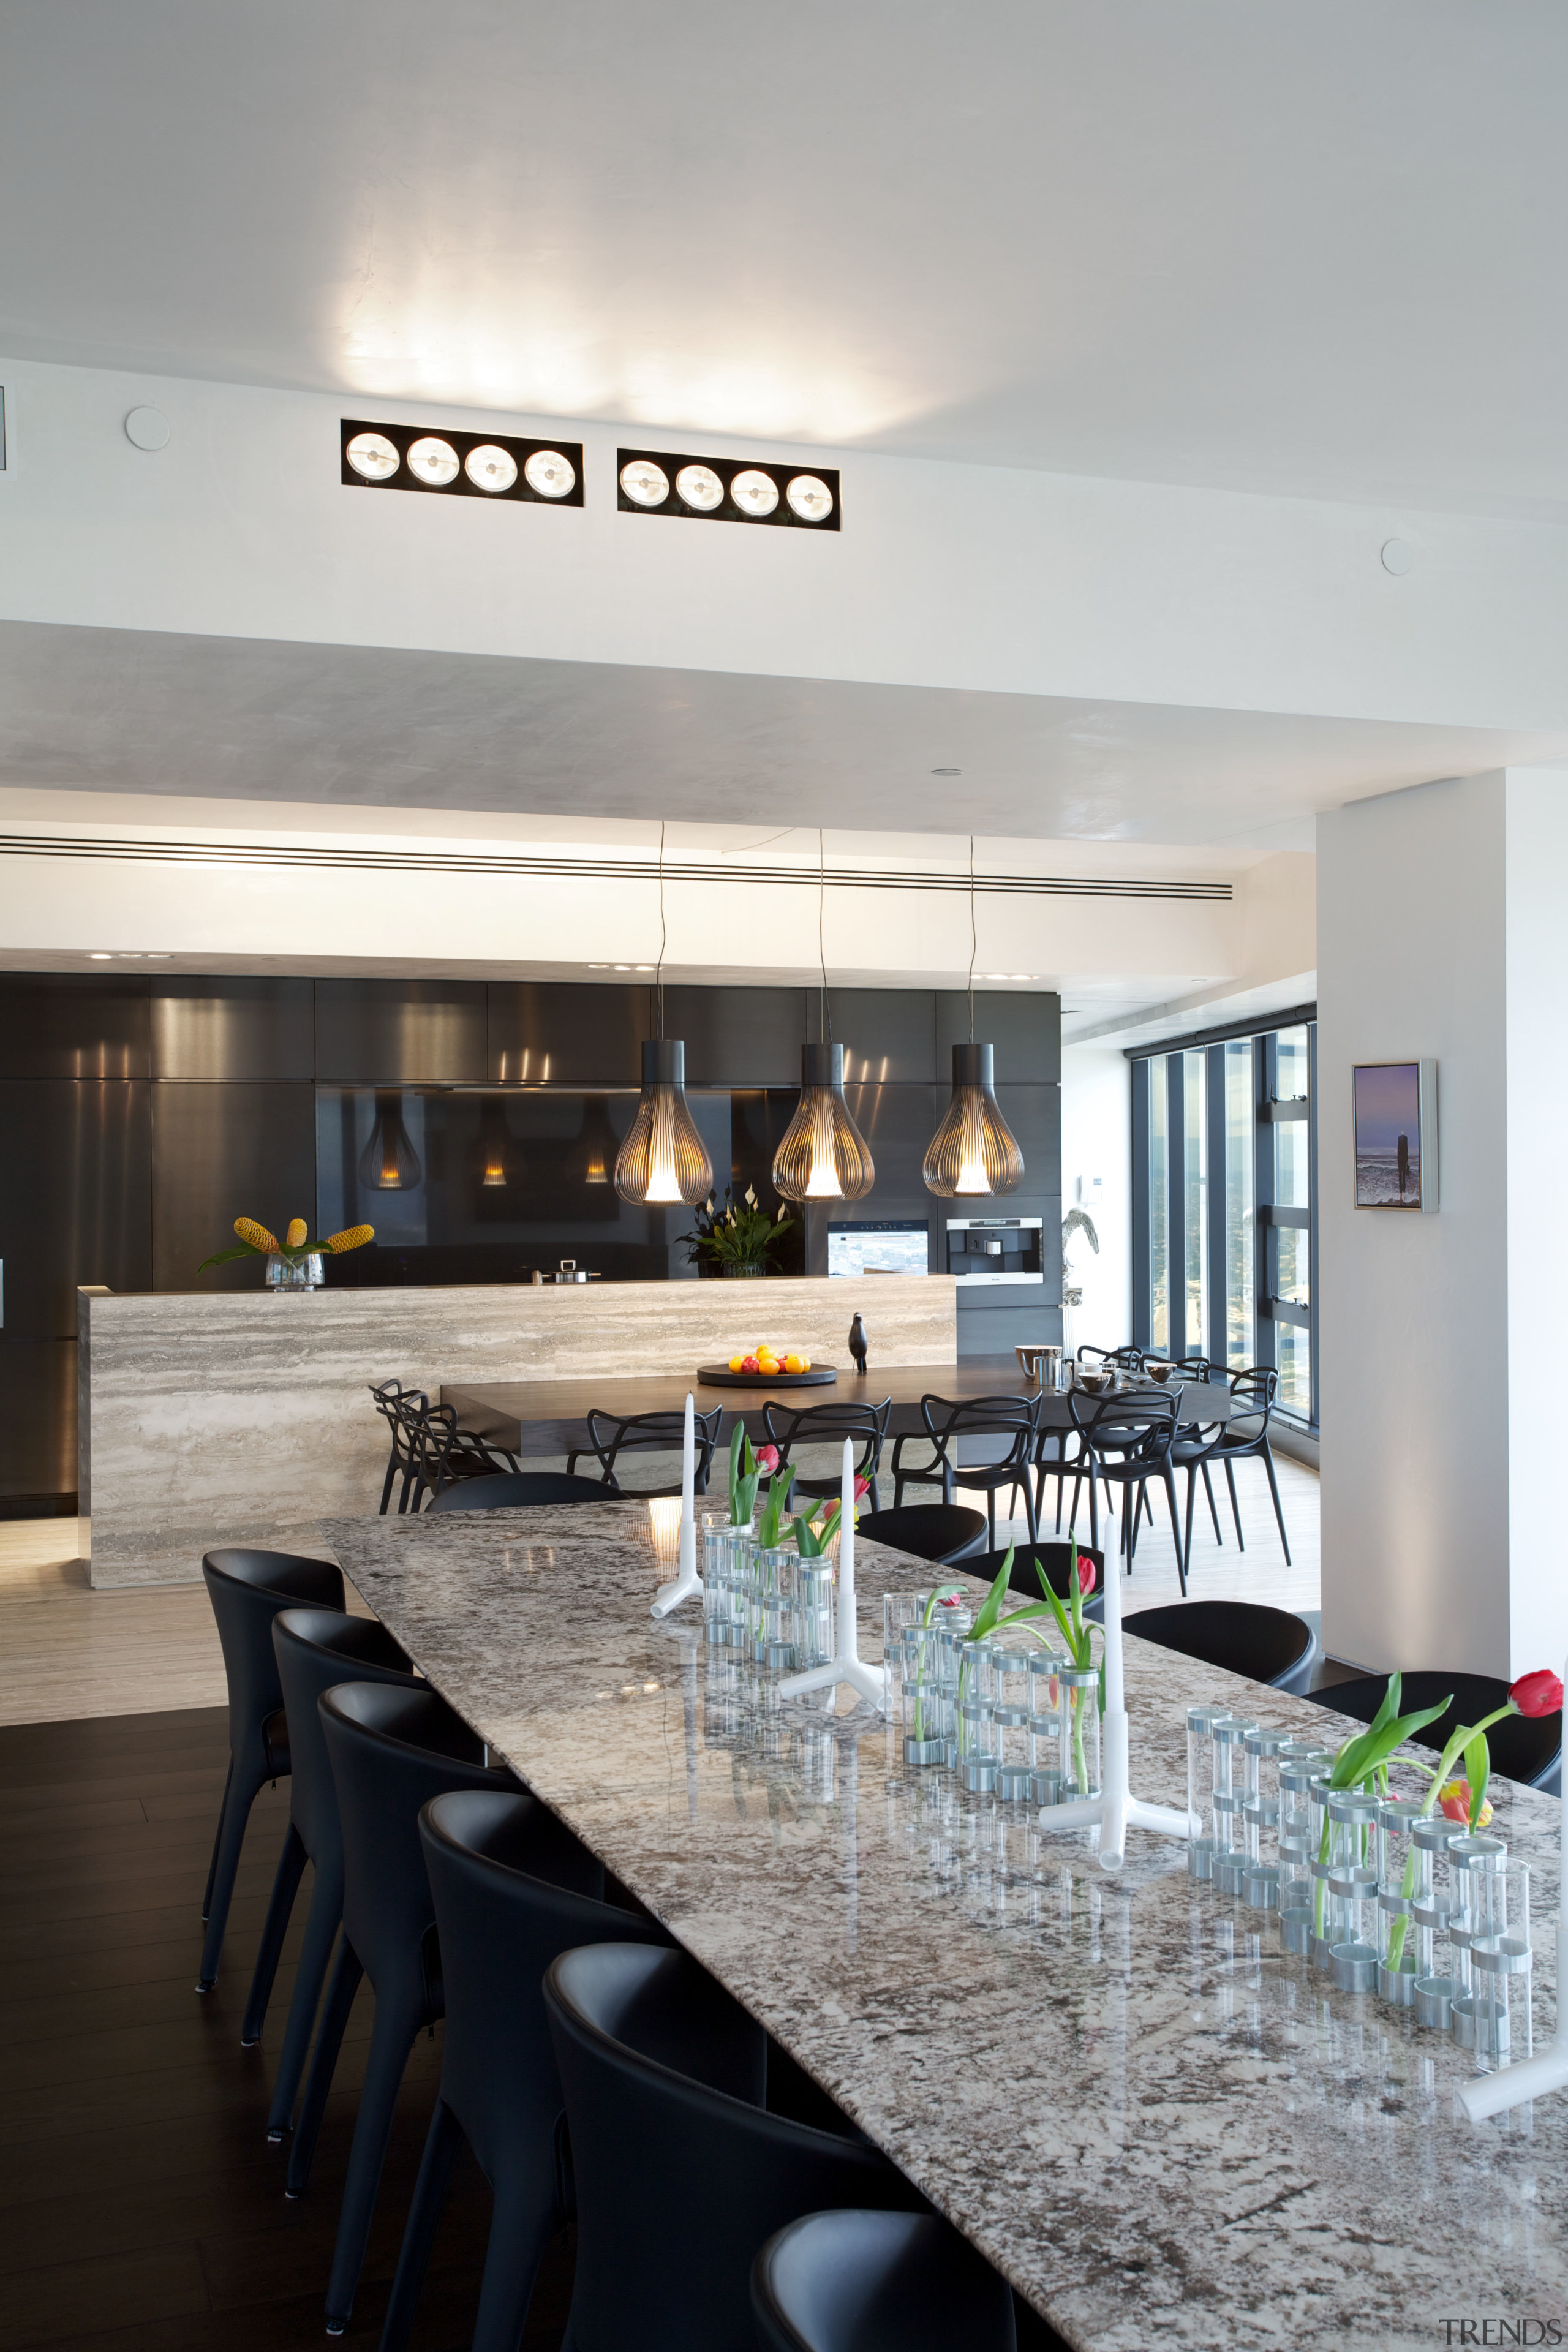 Penthouse apartment entertainers kitchen - Penthouse apartment entertainers interior design, restaurant, table, gray